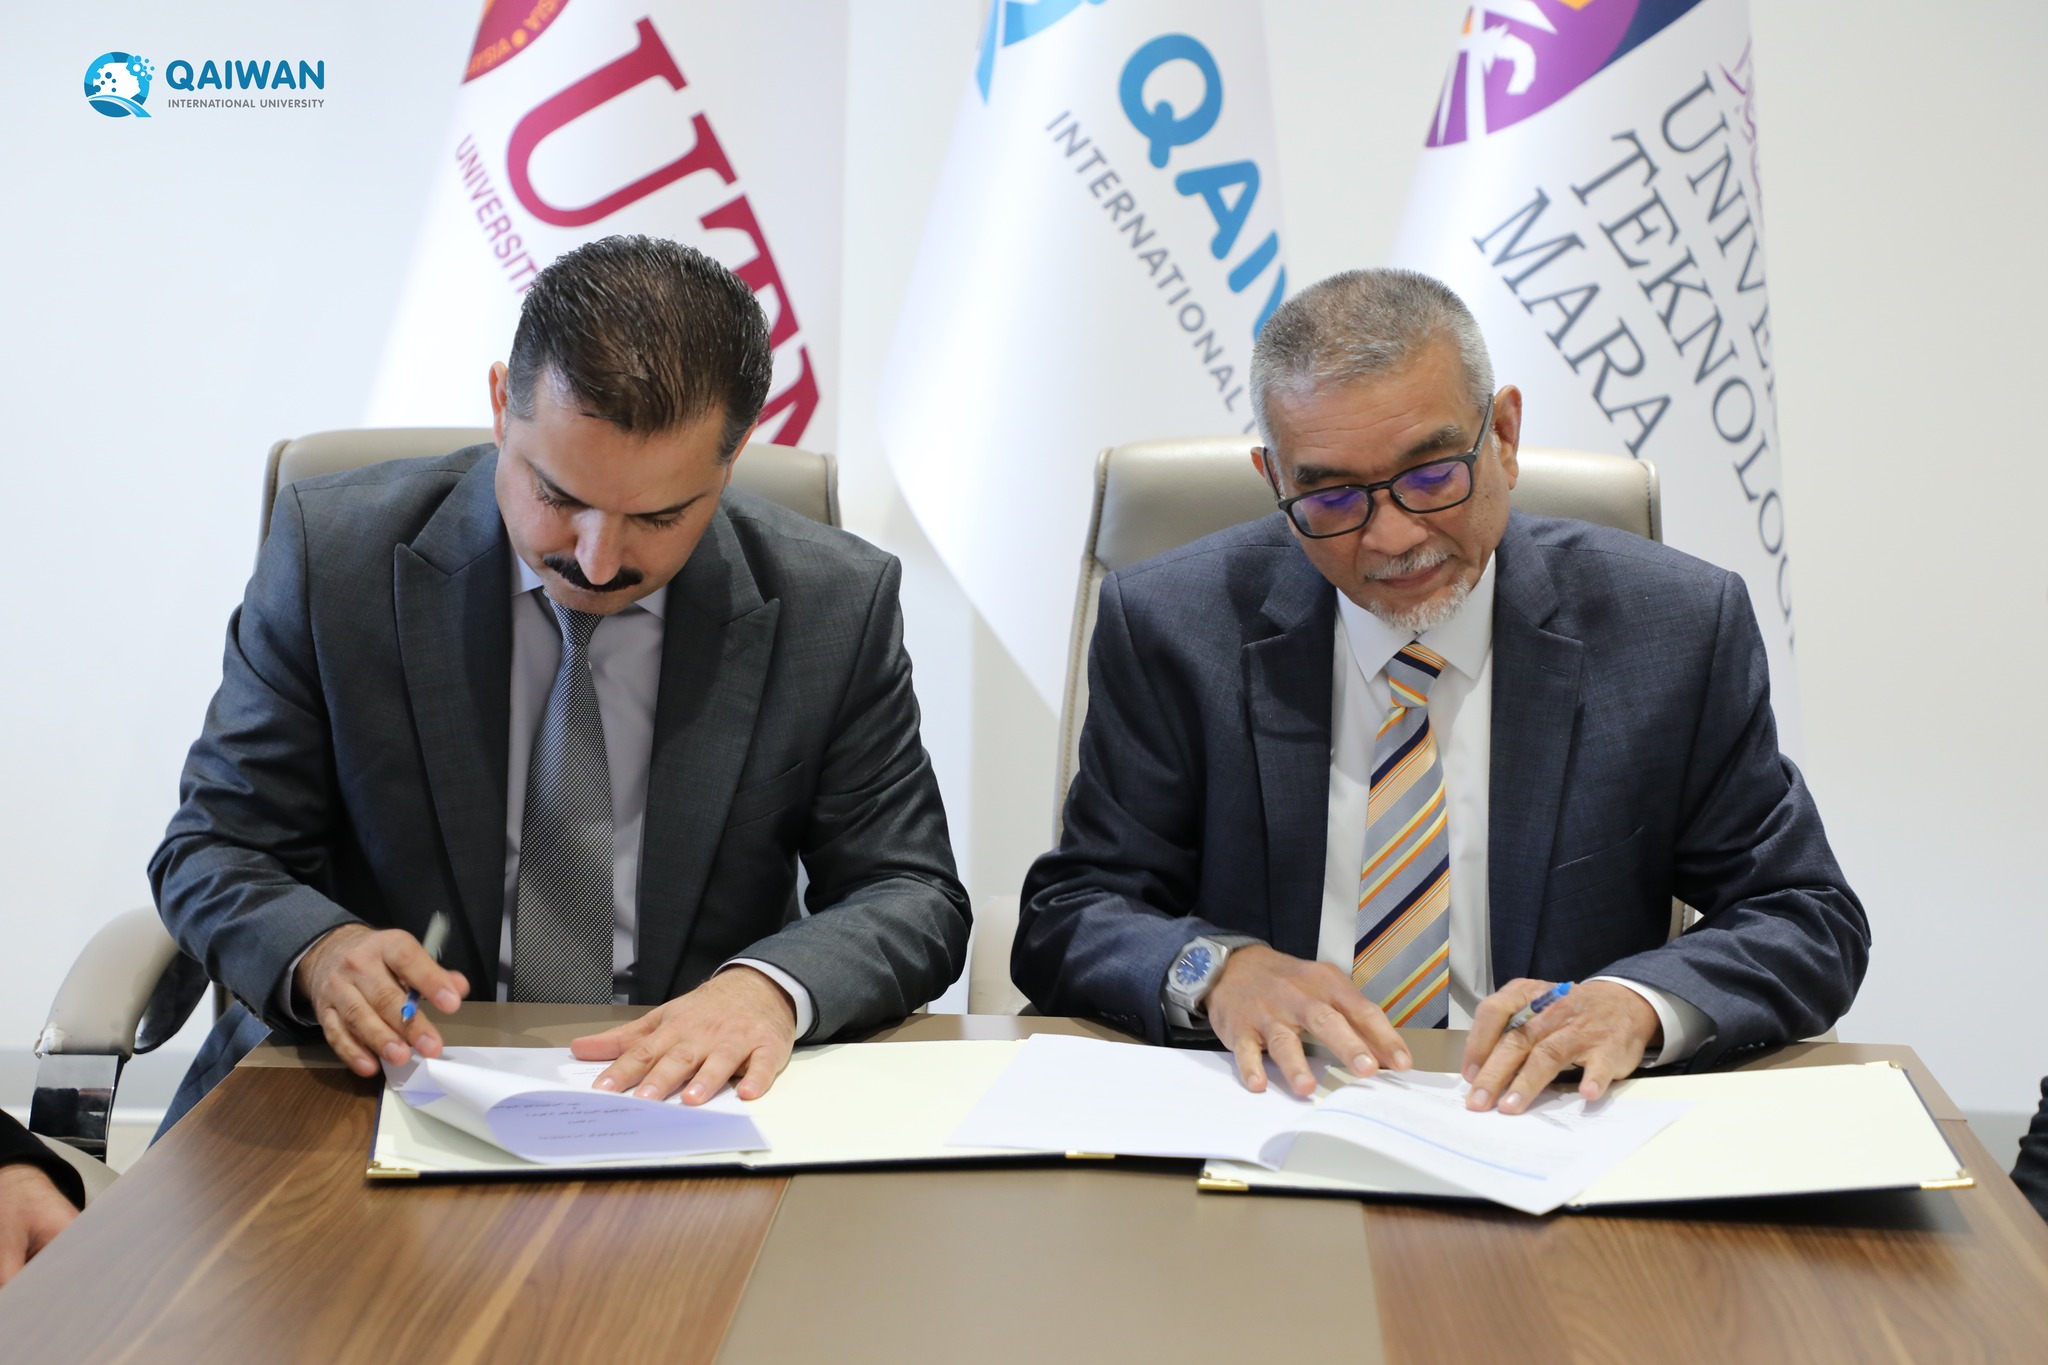 Formal ceremony took place during which Assist. Prof. Dr. Ismail bin Abdulrahman and Mr. Hawzhin Osman Mohammed, signed a memorandum of understanding.